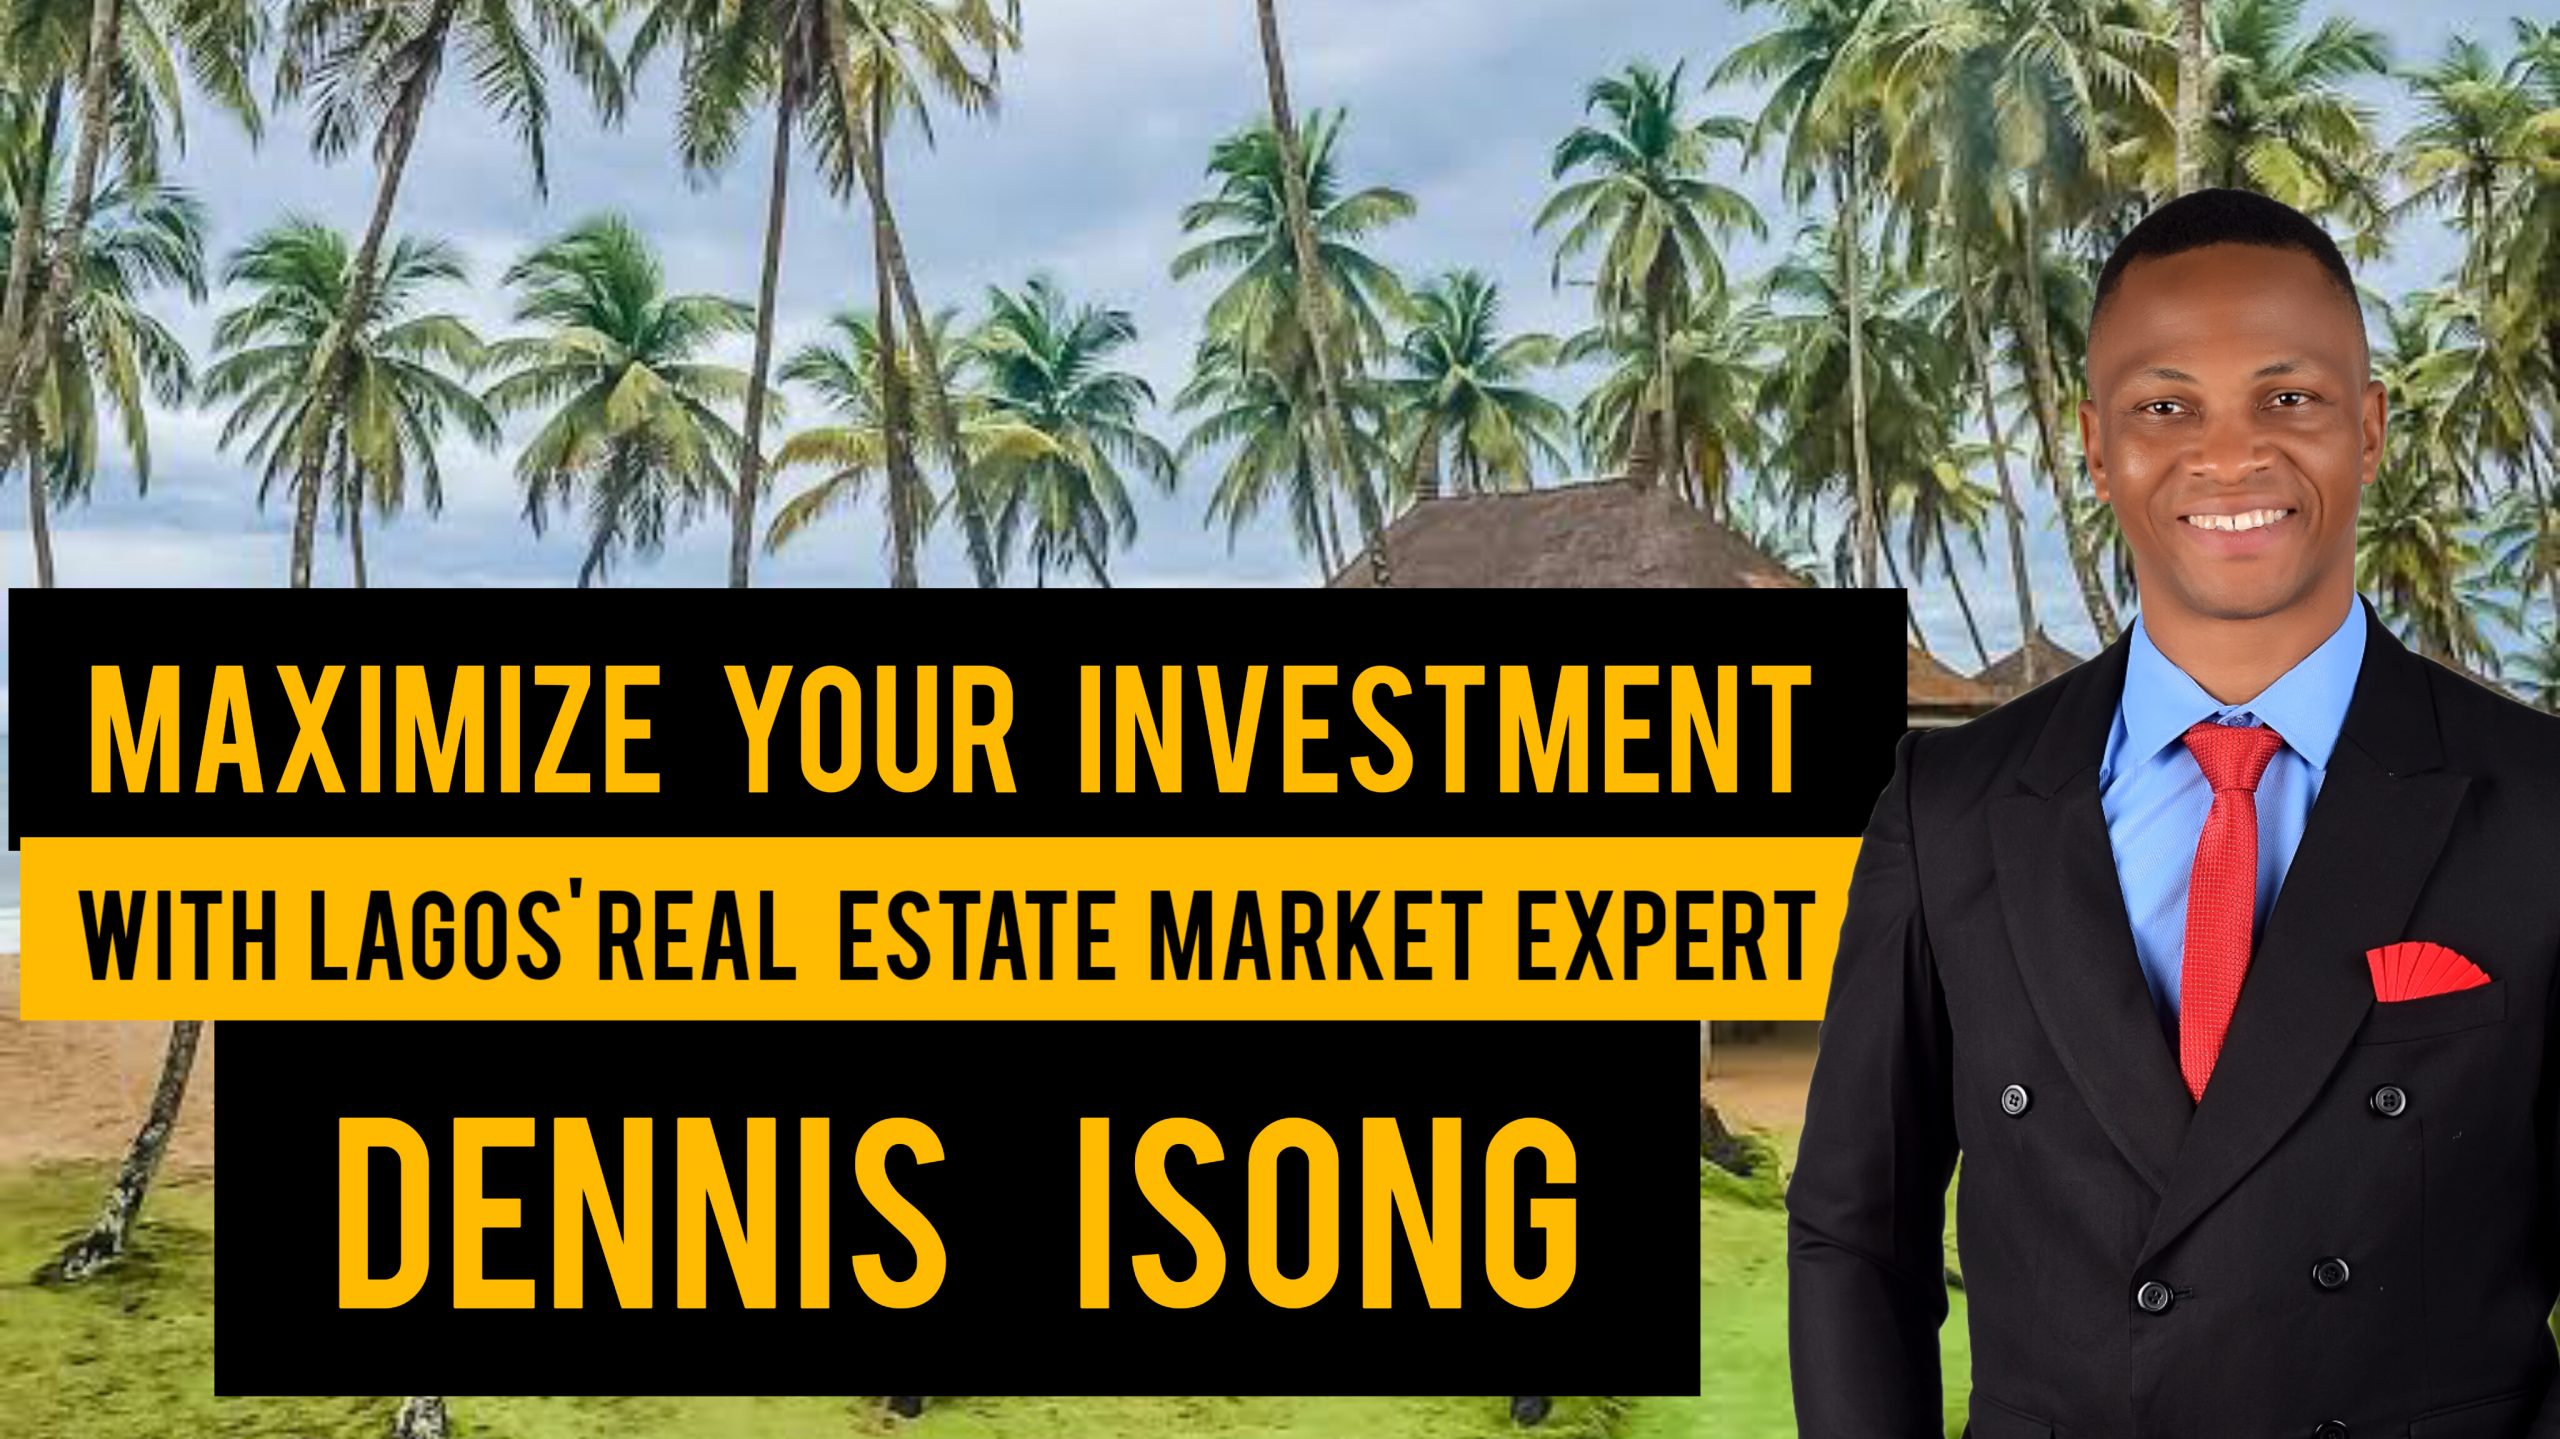 SPOT YOUR DREAM HOME IN LAGOS WITH ONE SIMPLE CALL TO DENNIS ISONG